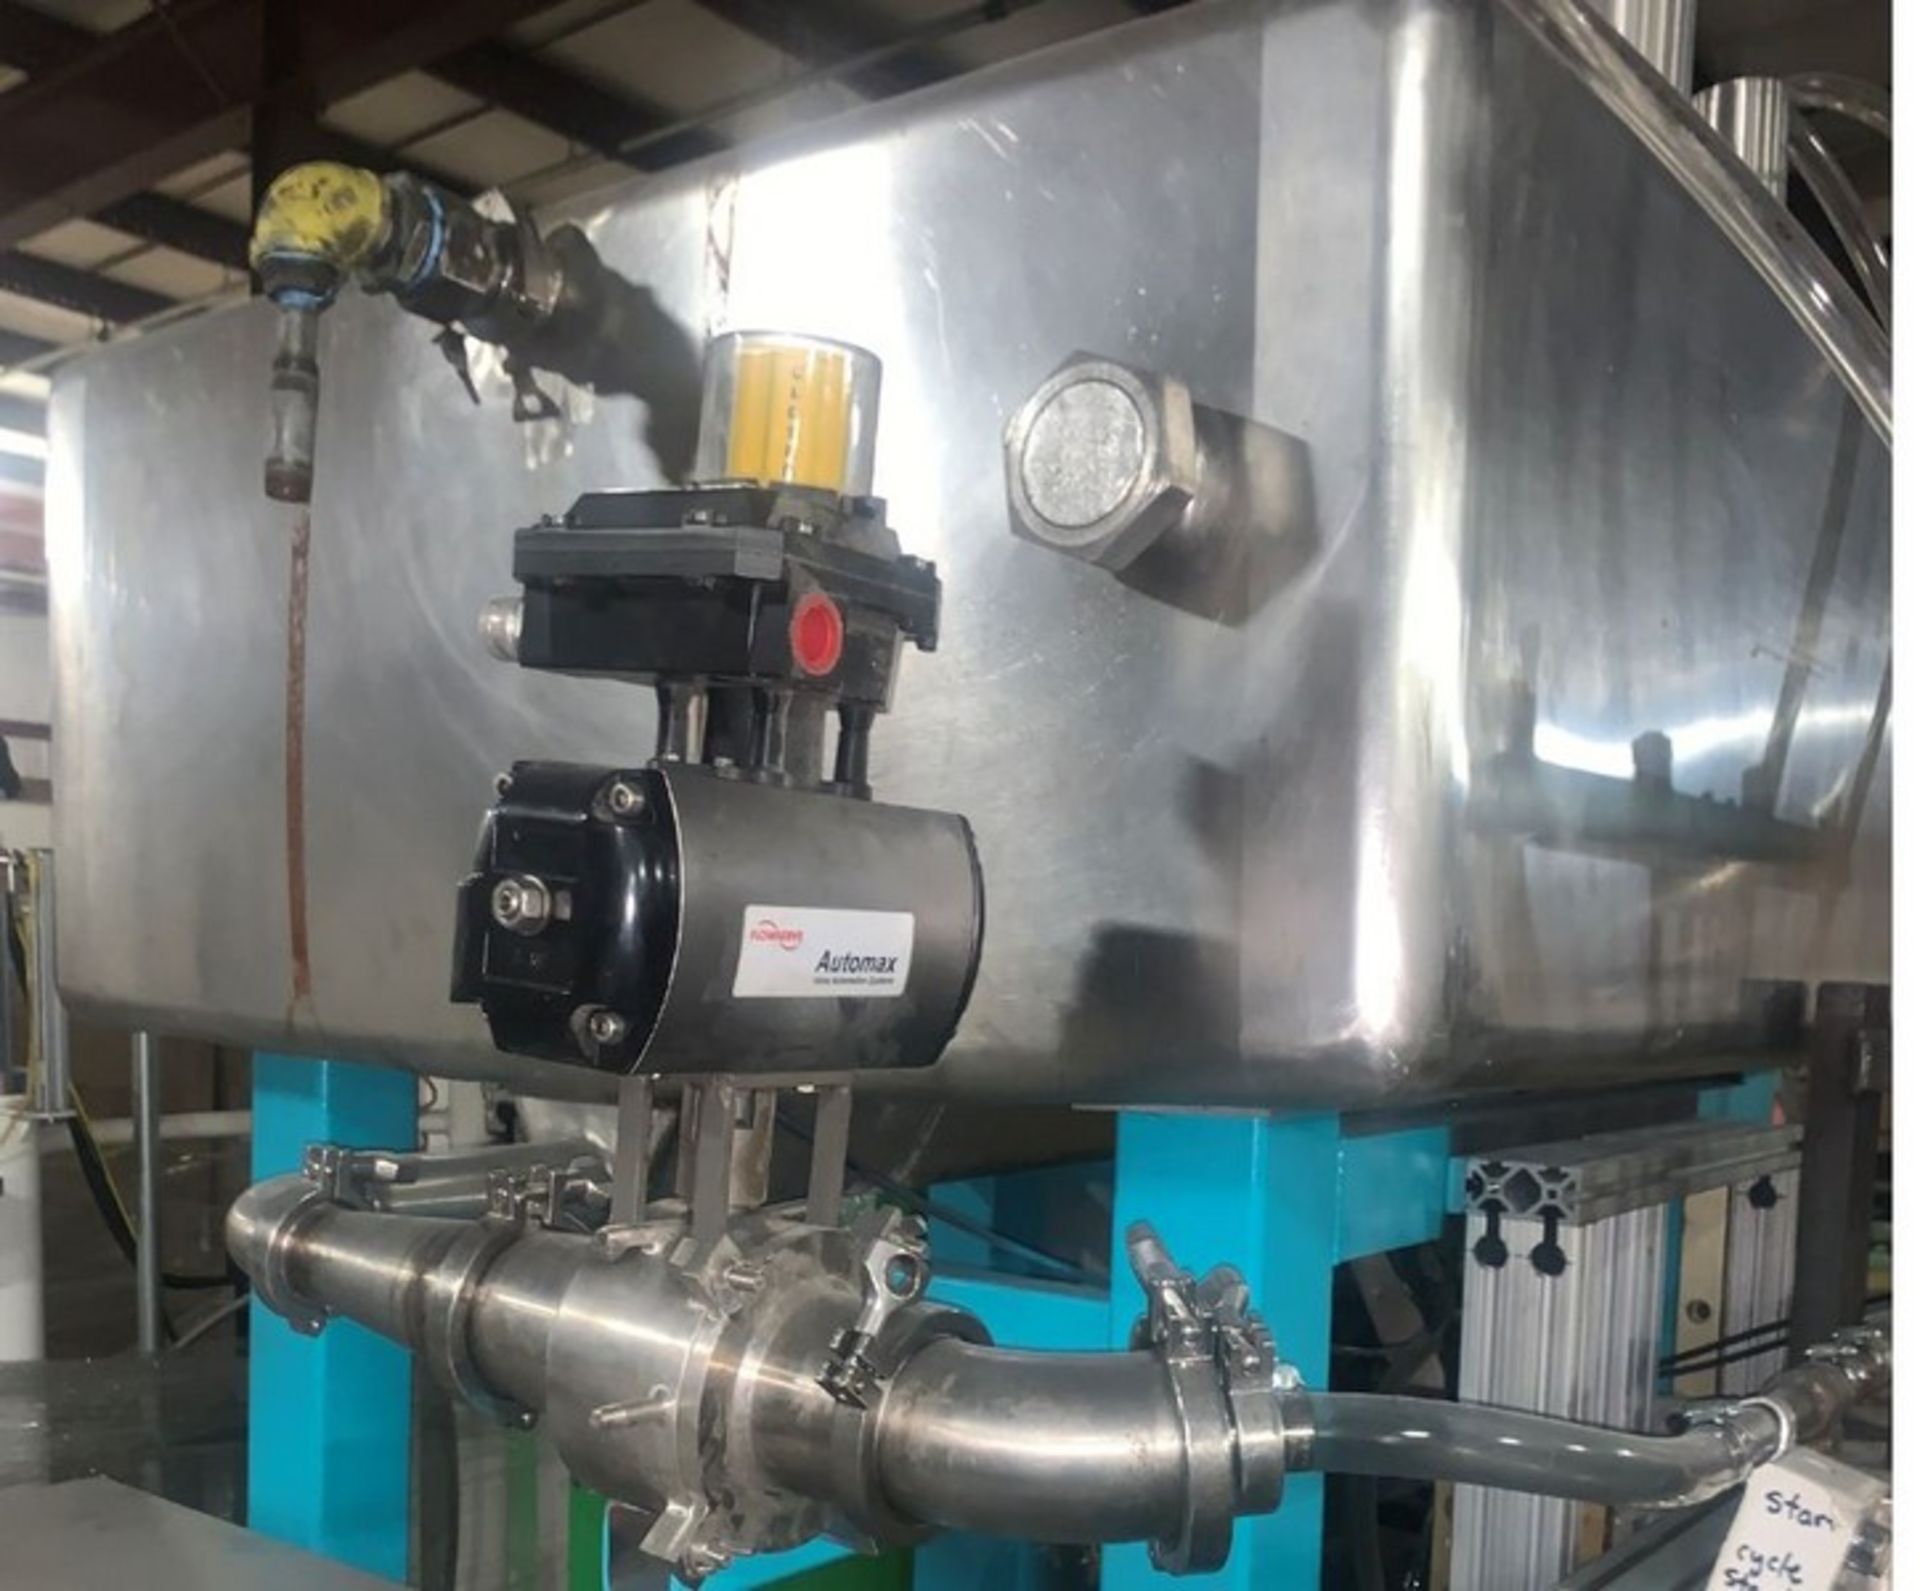 Custom Four Head Gallon Filler with 200-gallon reservour in caster to mive over existing - Image 3 of 7